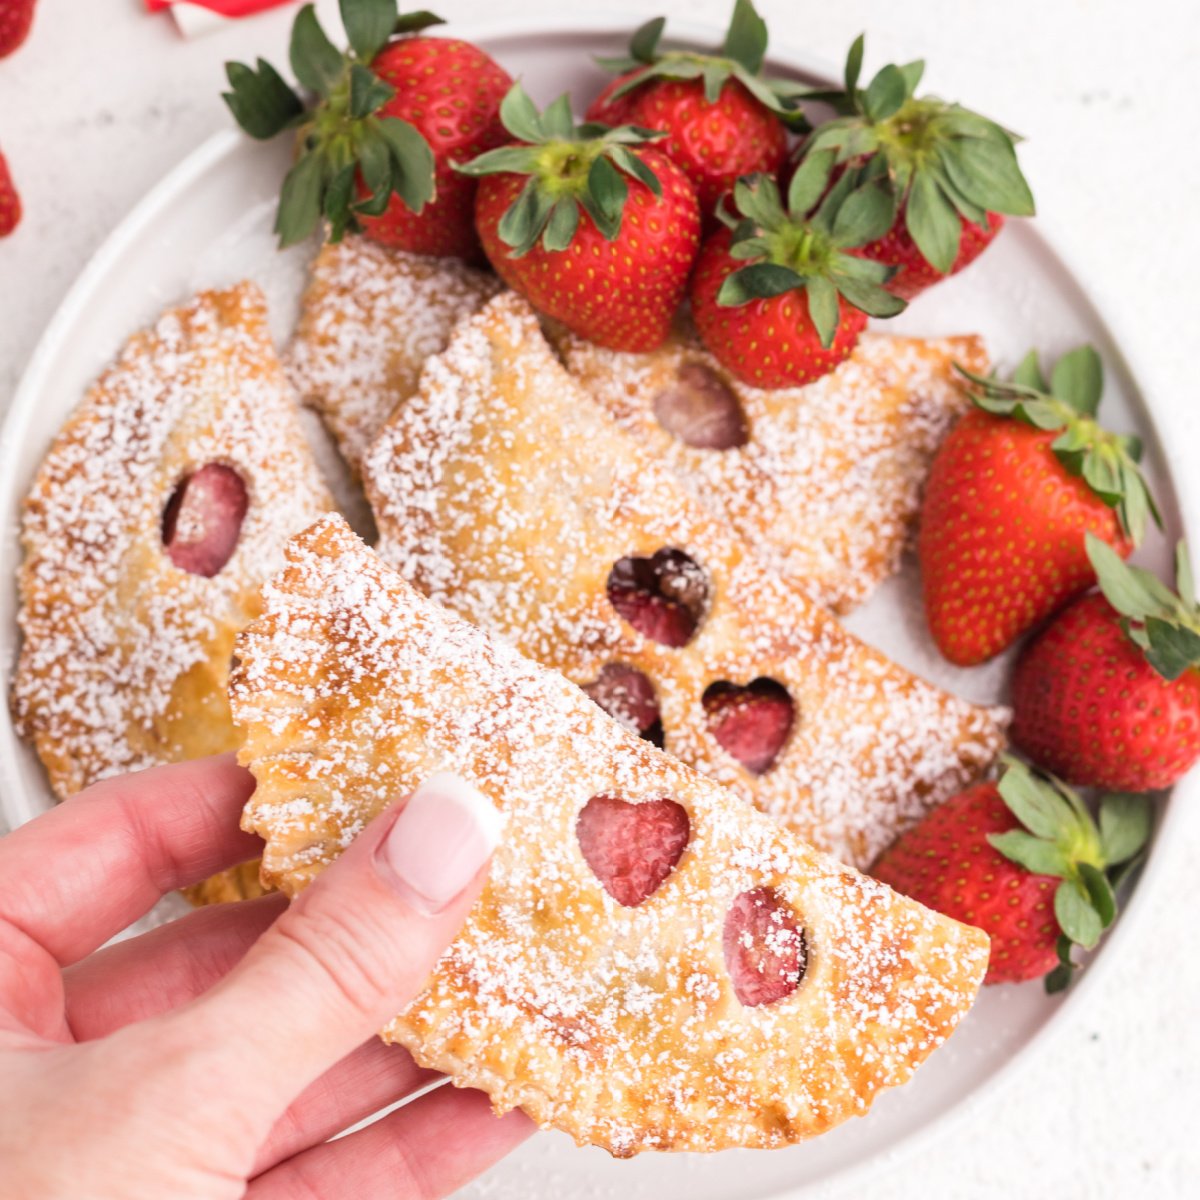 Strawberry nutella hand pies made in the air fryer and ready to eat. One being held.